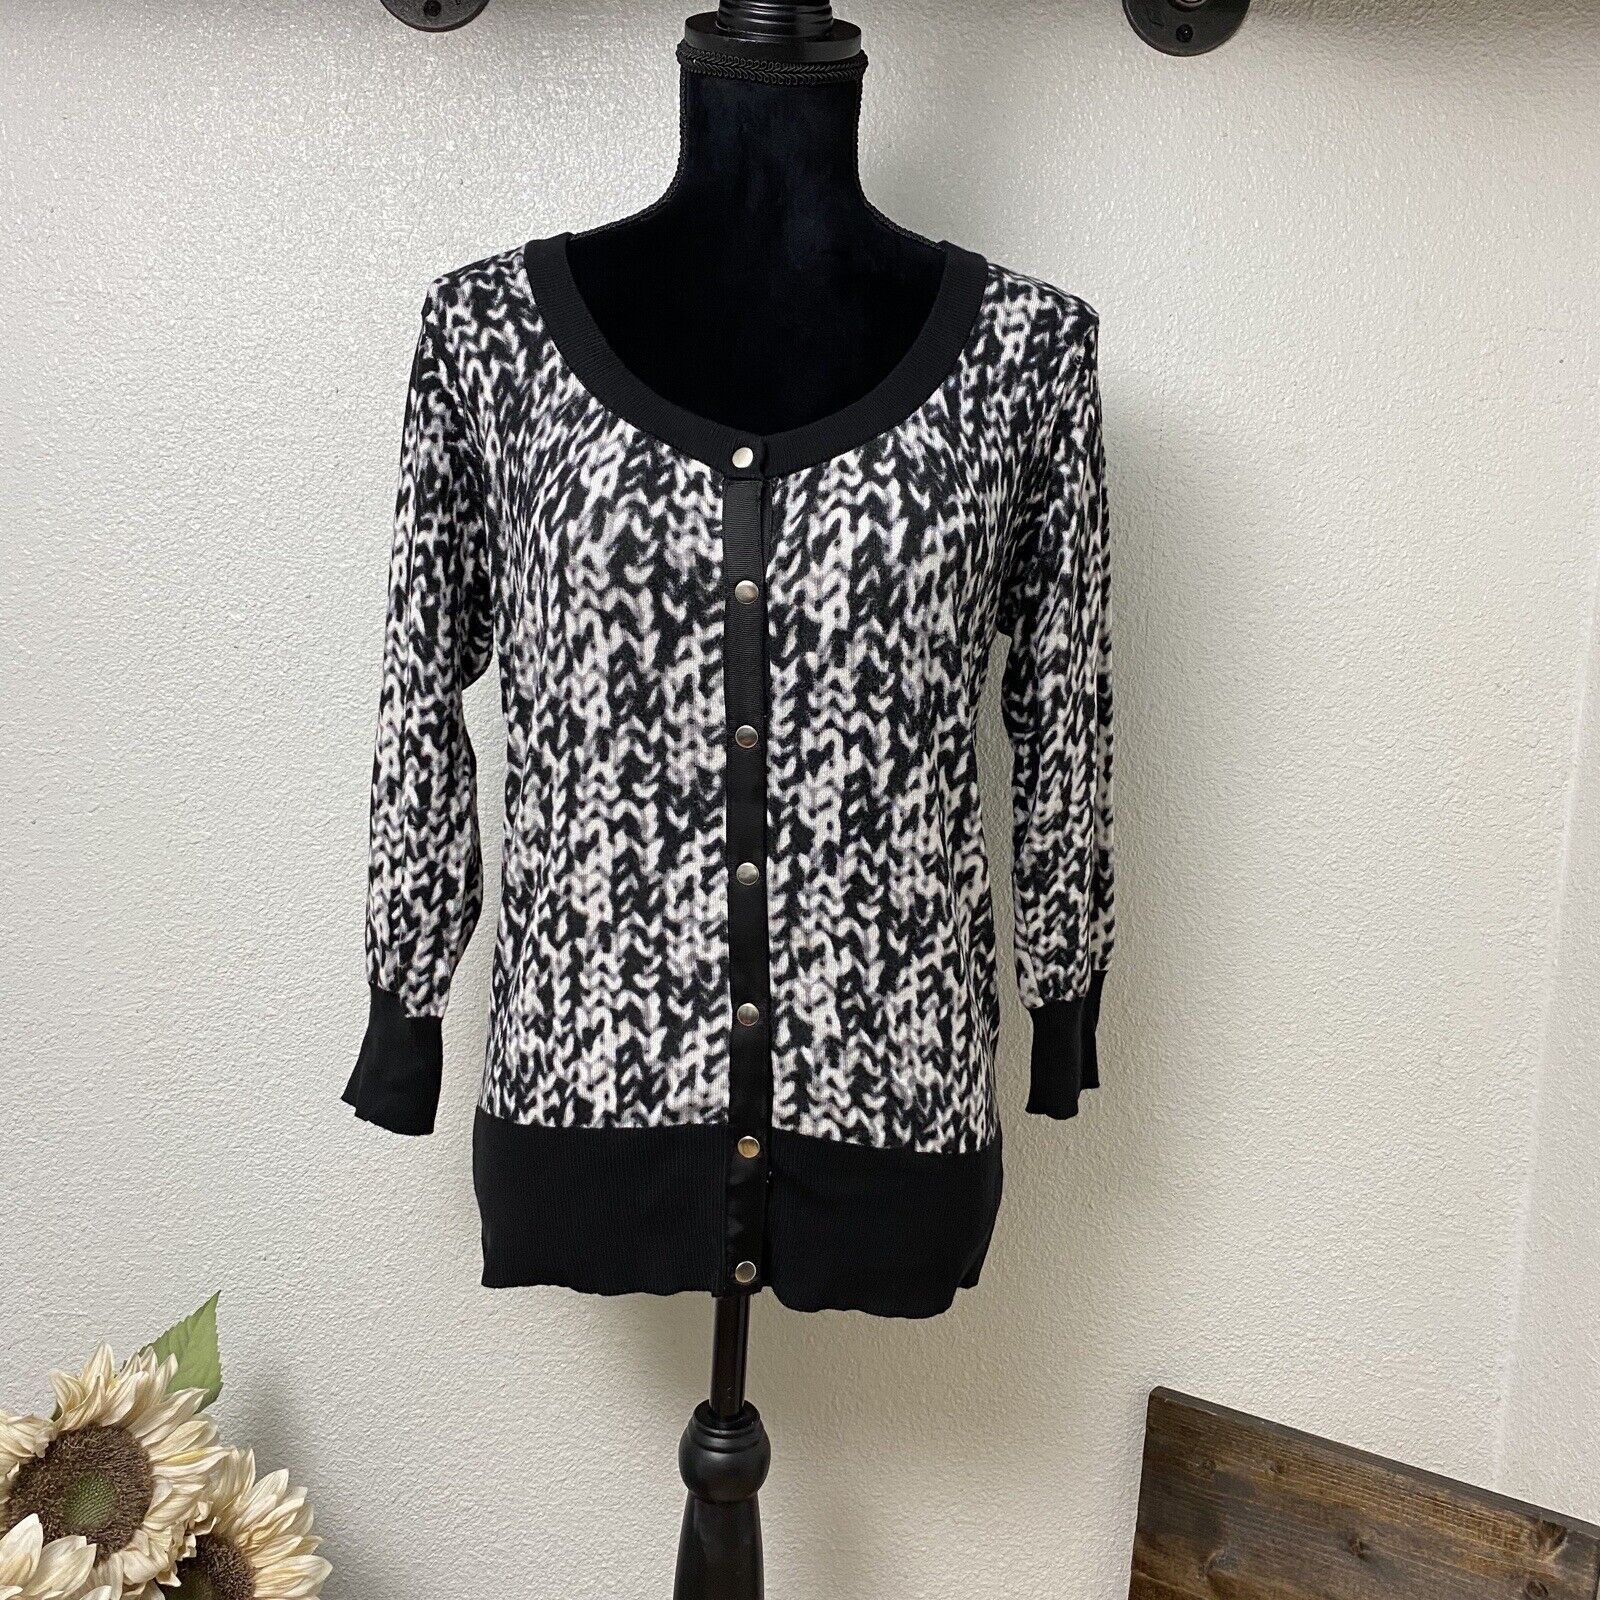 Snap Button Cardigan - Black and White - Medium - Super Soft! - Maurices